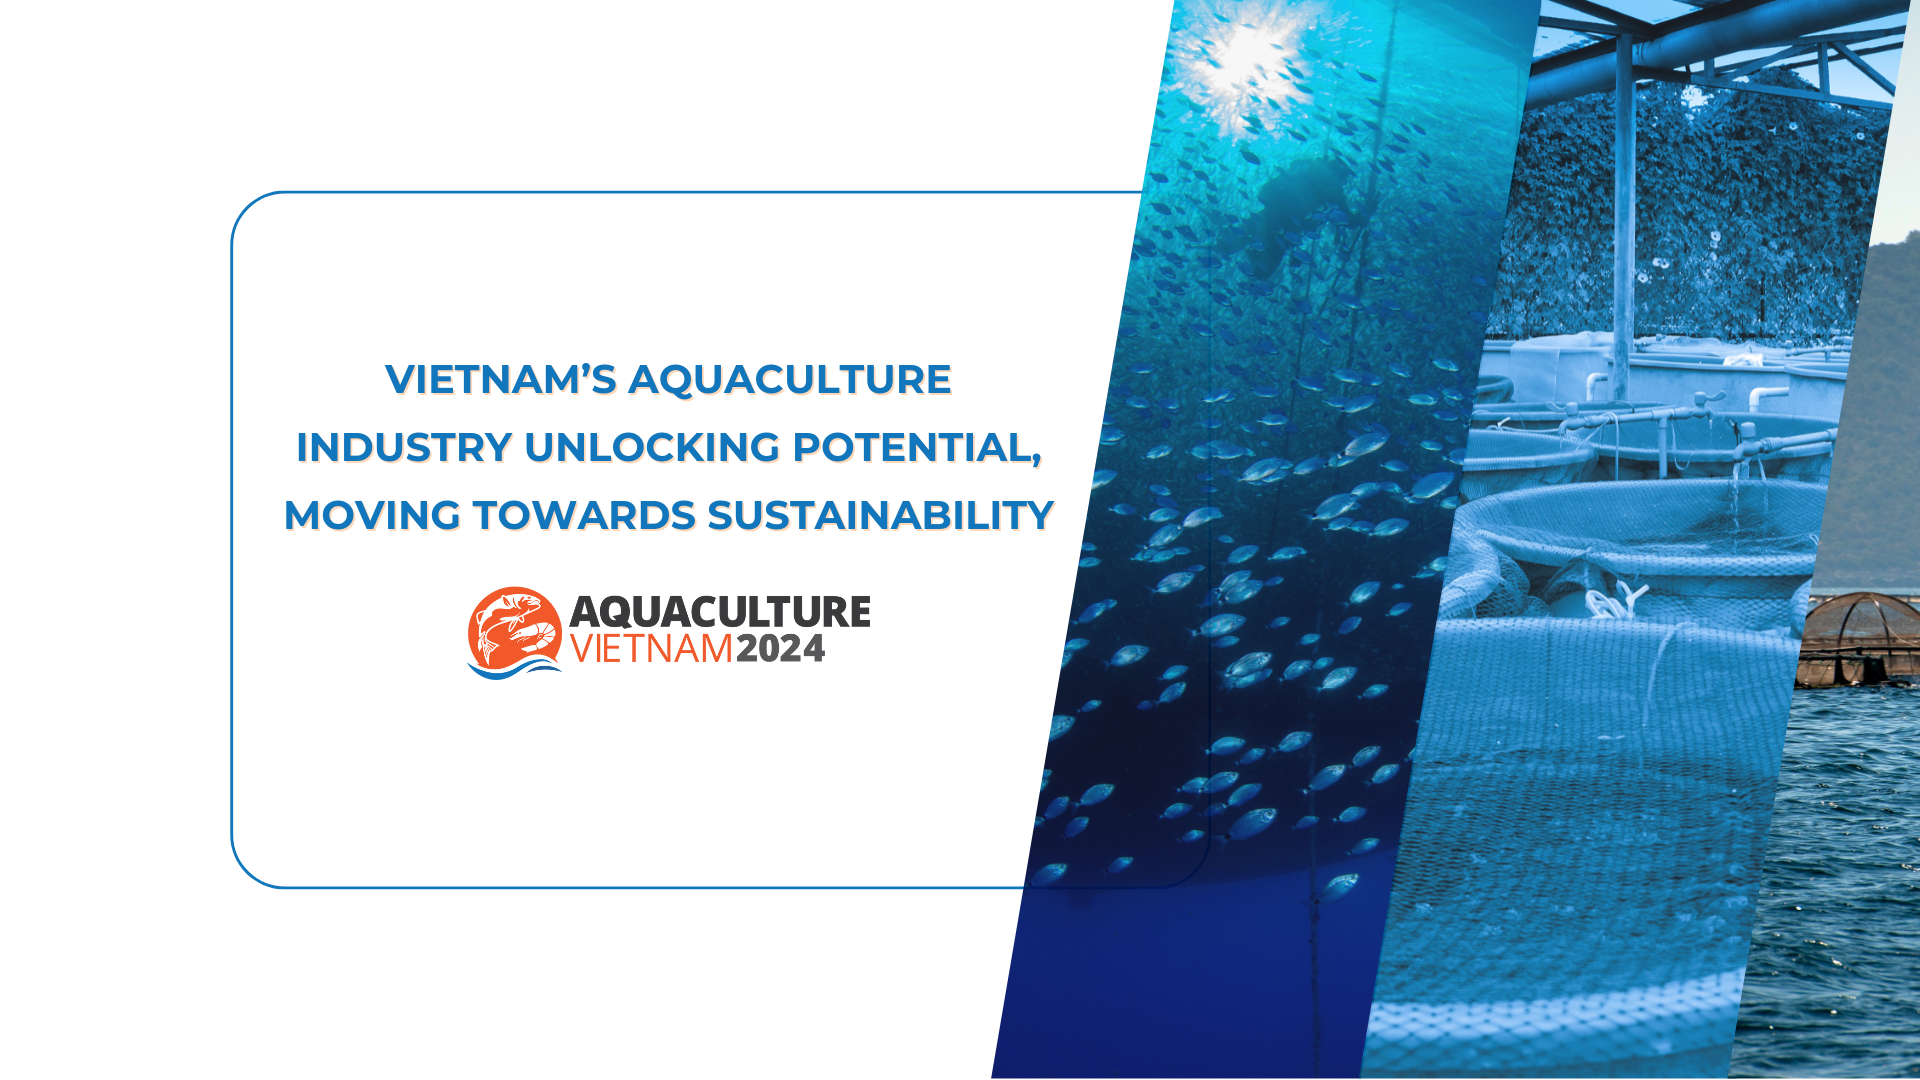 Achievements, potential, and sustainable development of Vietnam's aquaculture industry